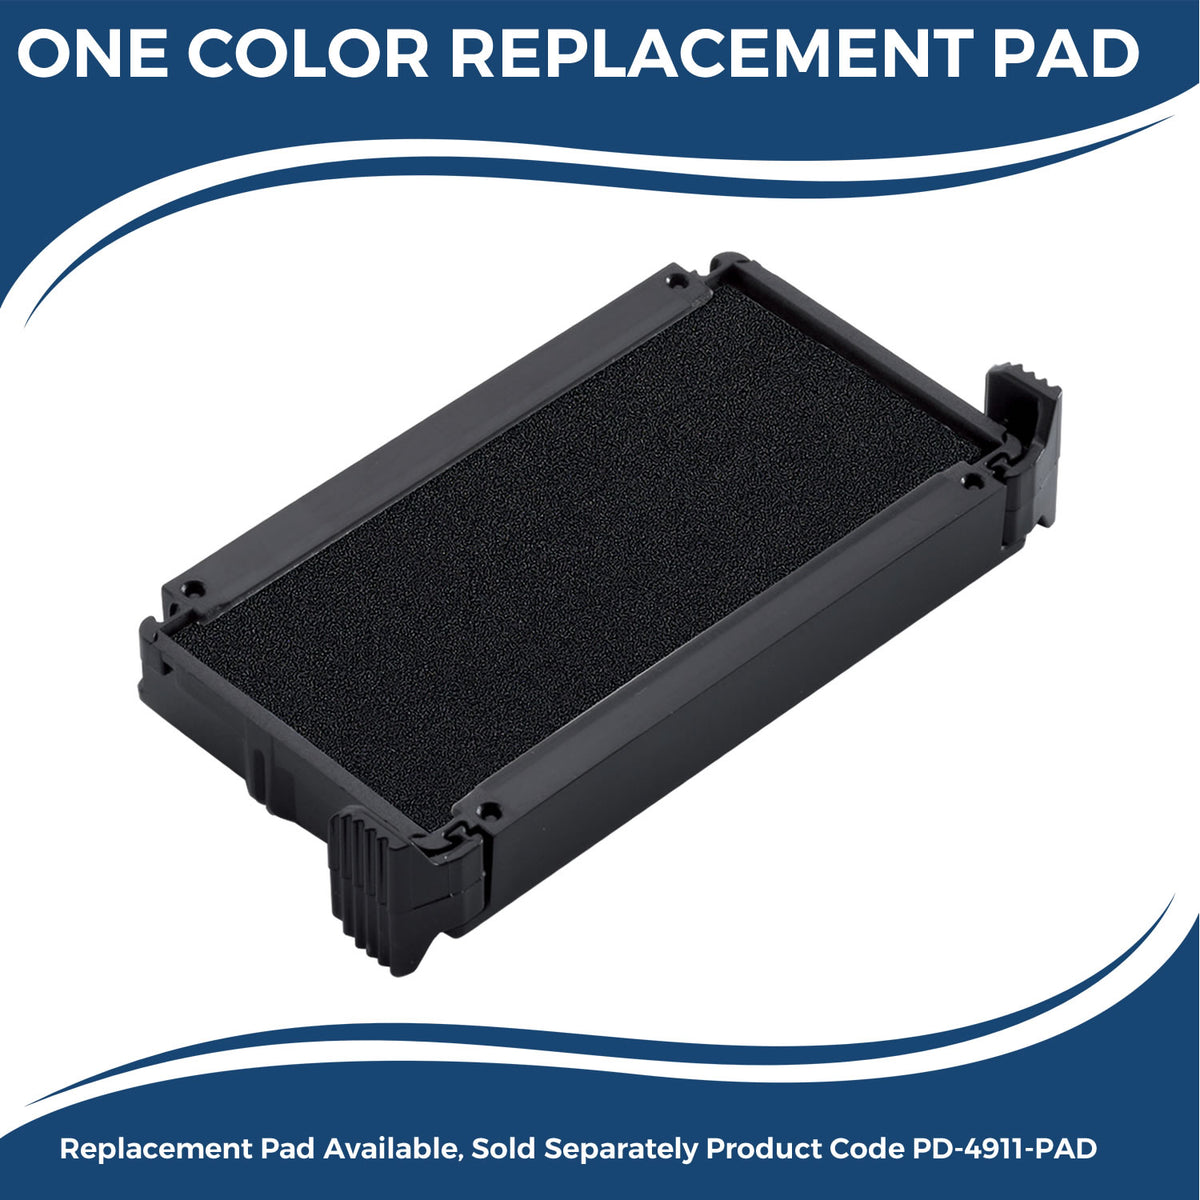 Self-Inking Bold FYI Stamp 4447S Small Replacment Pad